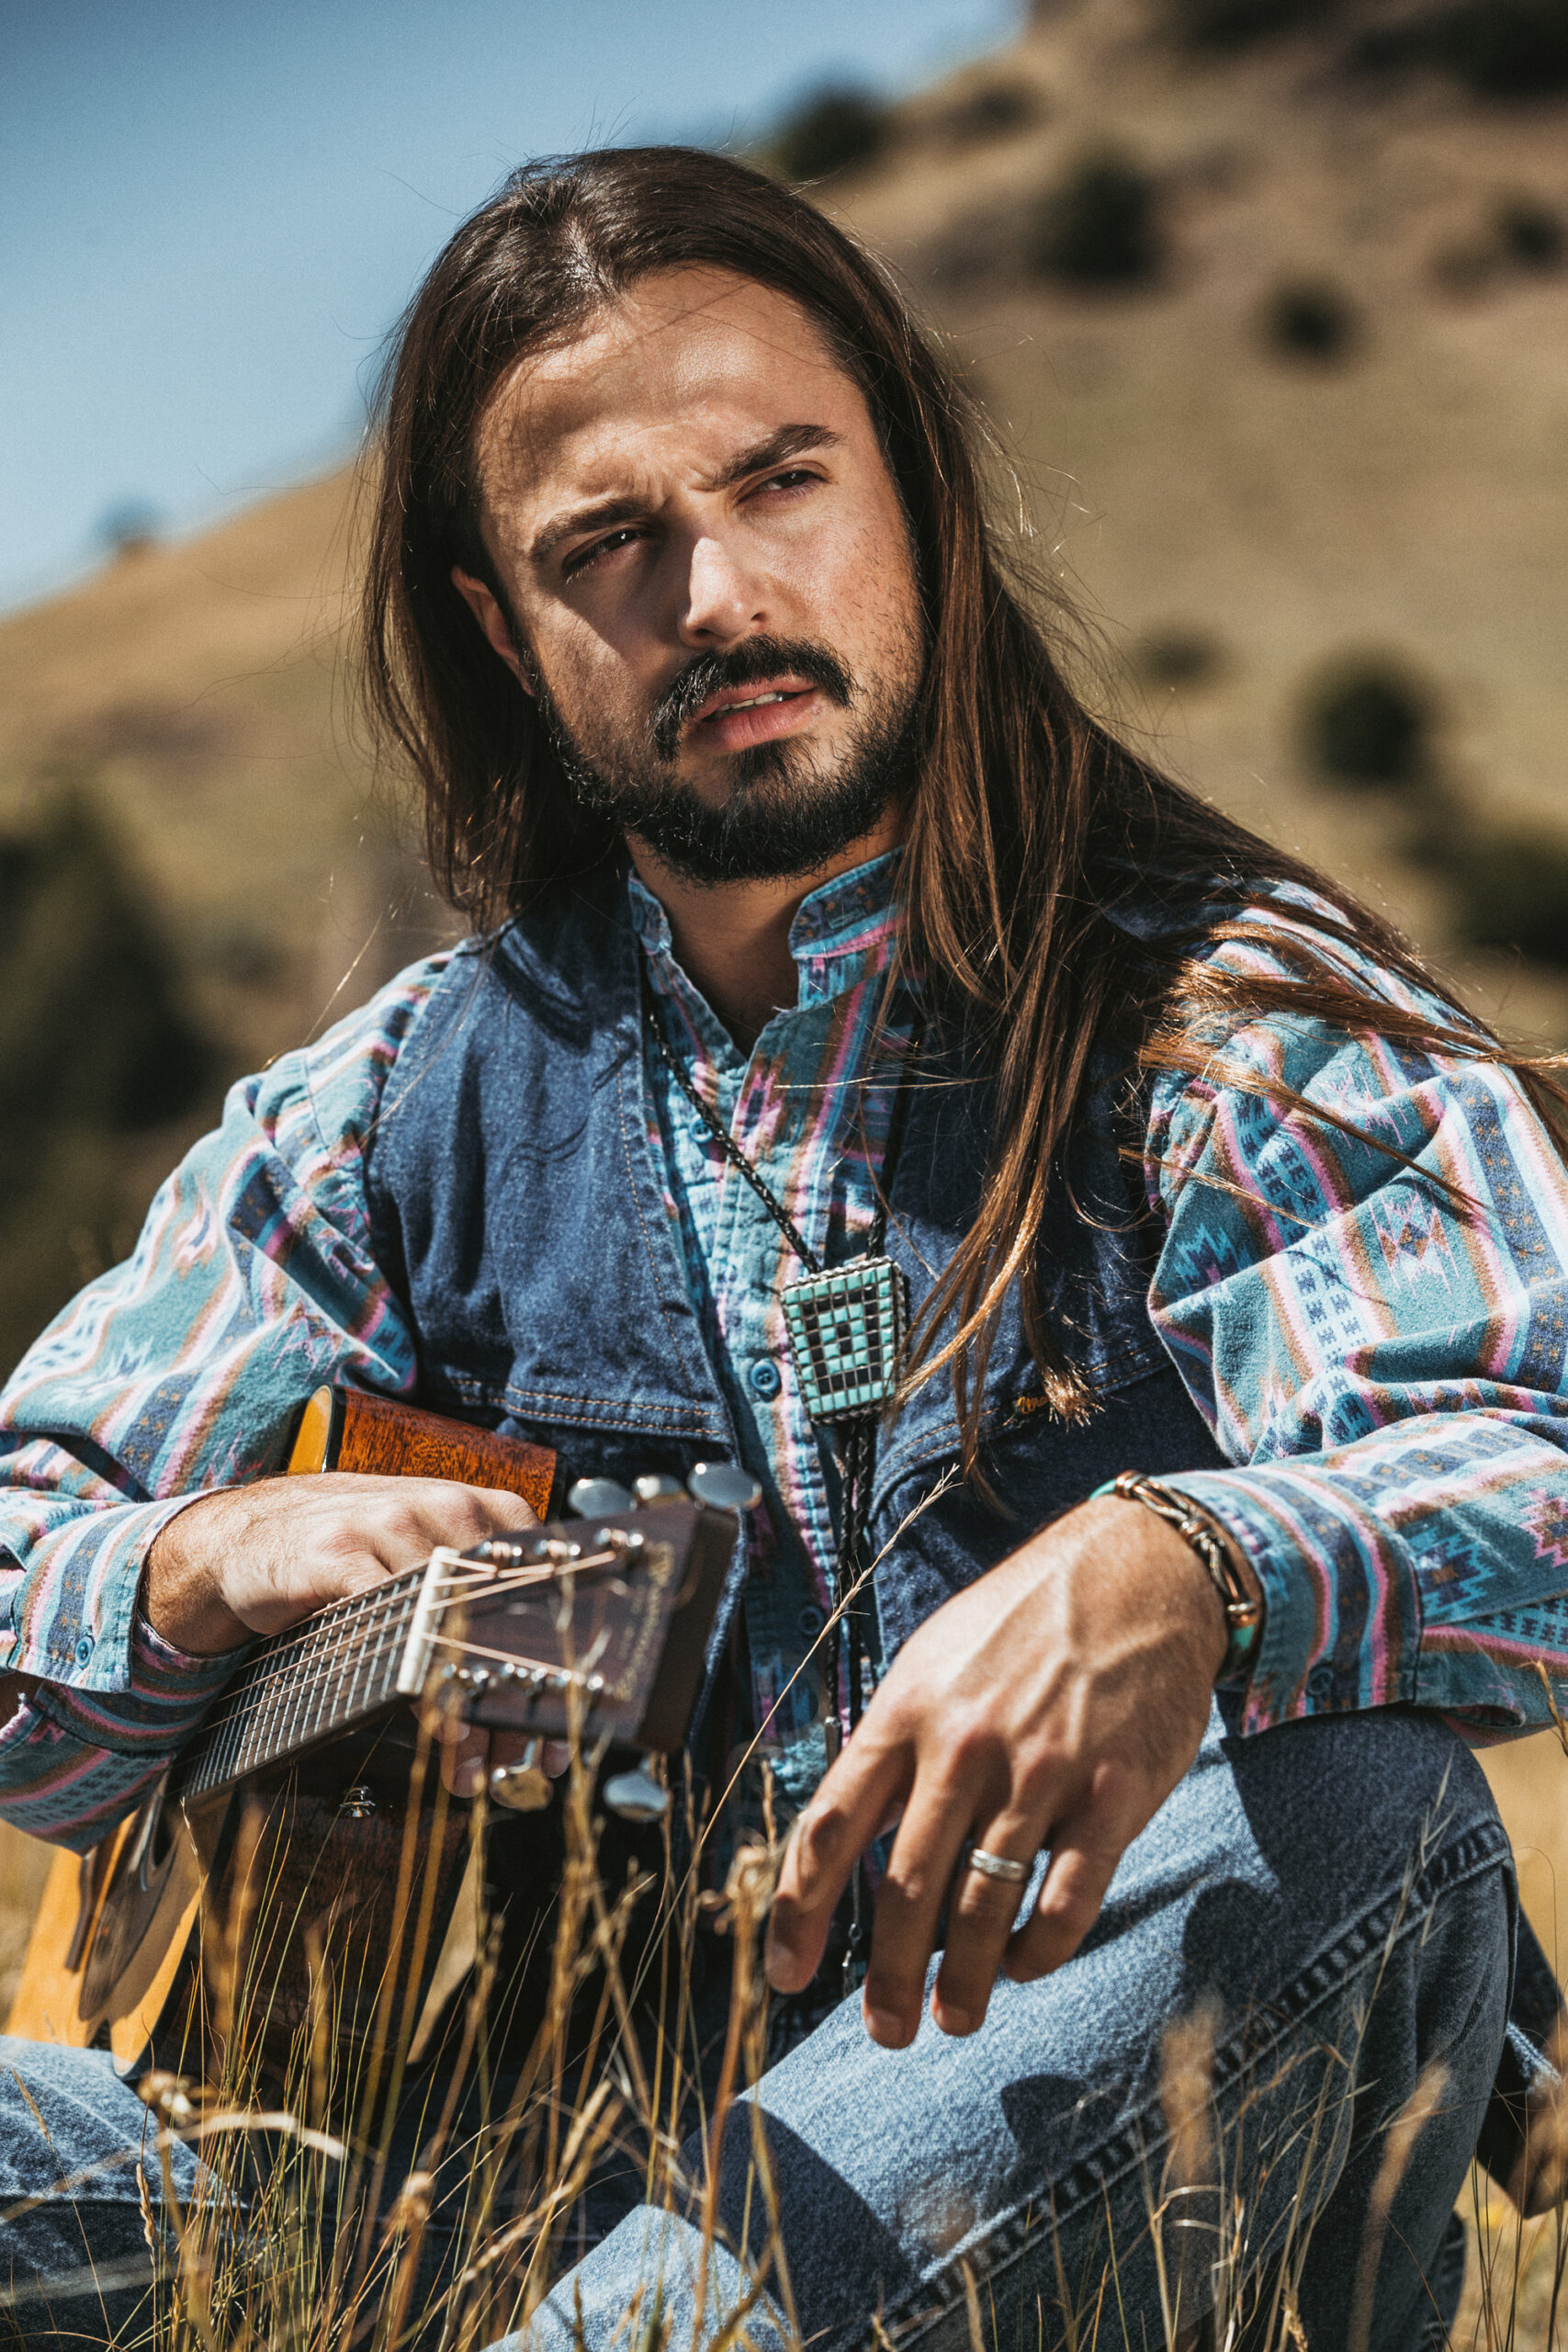 Ian Munsick Opens Up About the Importance of Celebrating Western and Native American Culture in Sophomore Album “White Buffalo” (Exclusive)